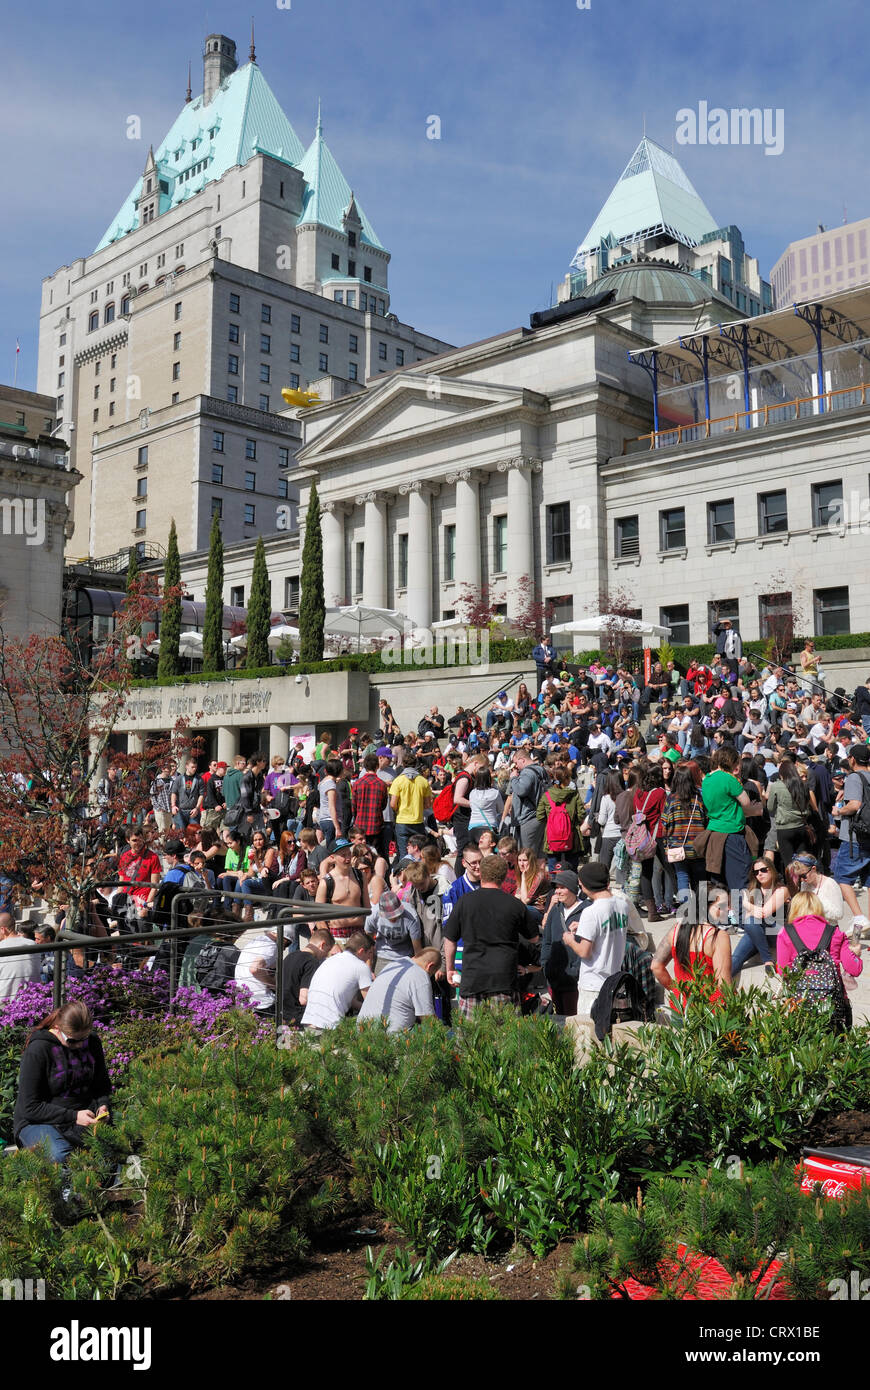 Mass amount of people gather at the Vancouver Art Gallery during the City's annual 4 20 Marijuana smoke in. Stock Photo